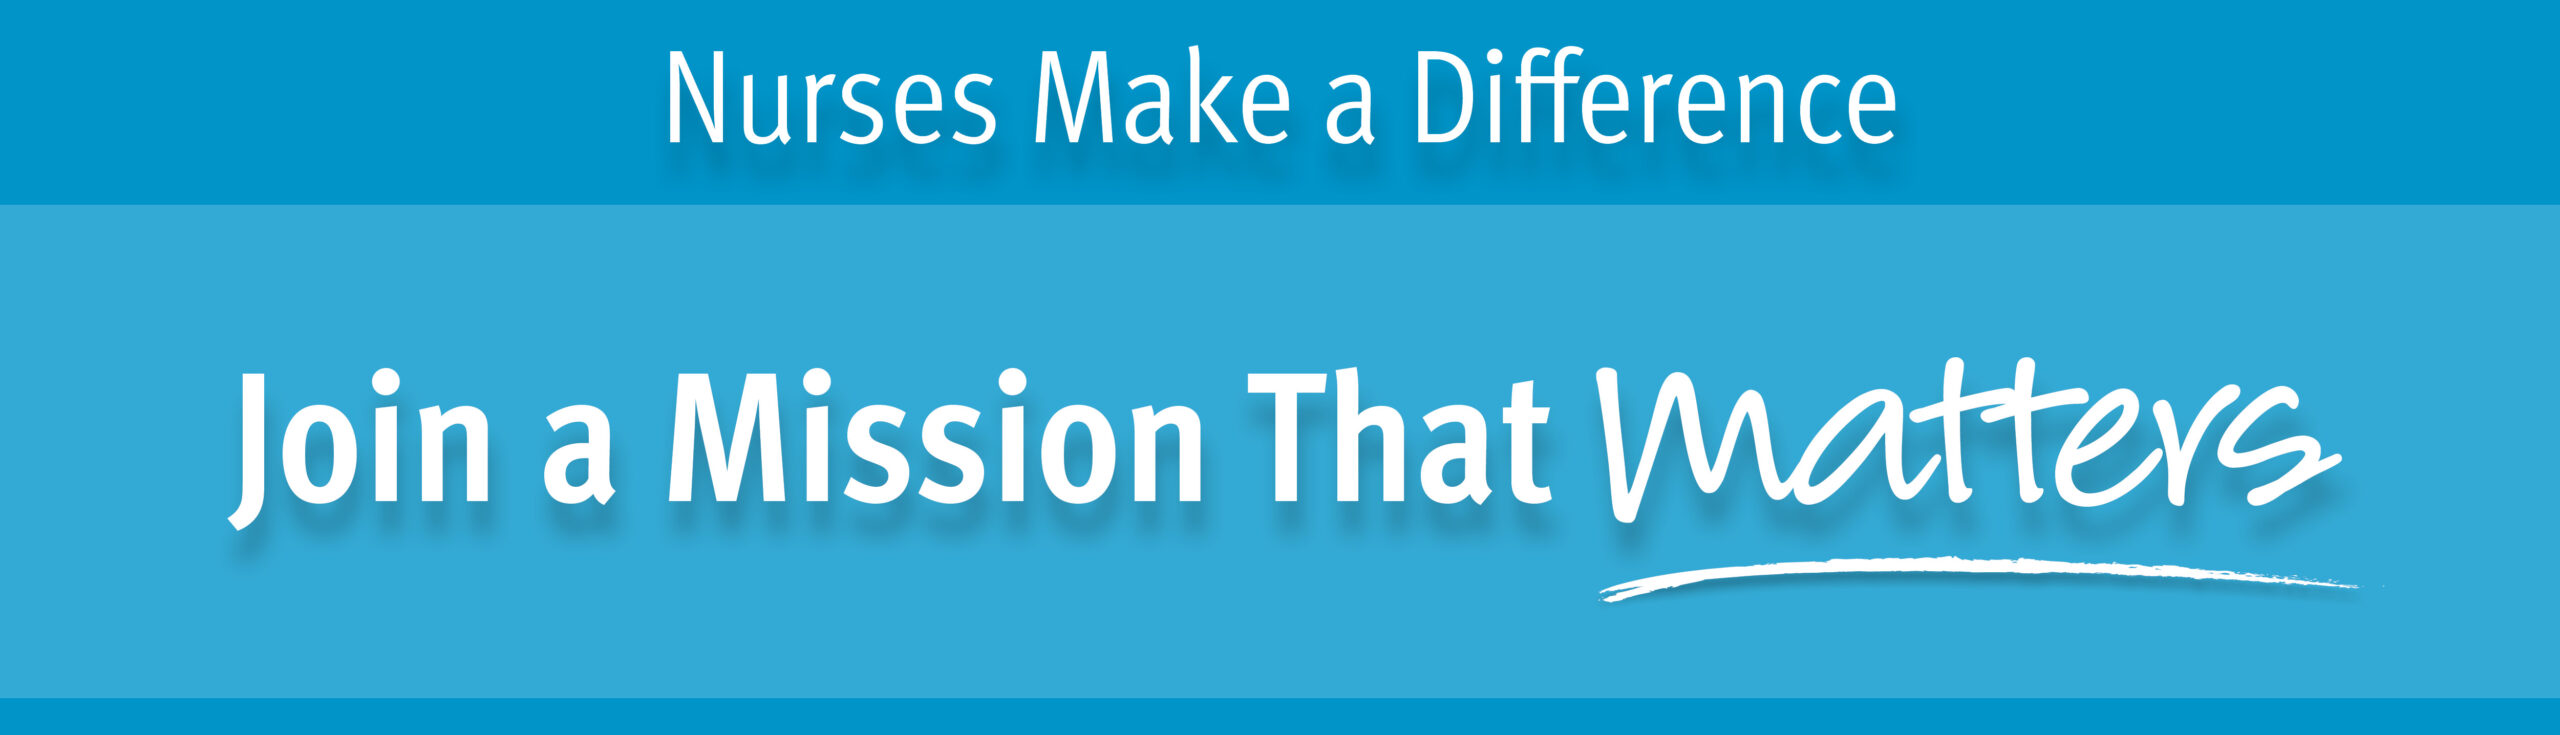 Nurses Make a Difference. Join a Mission That Matters